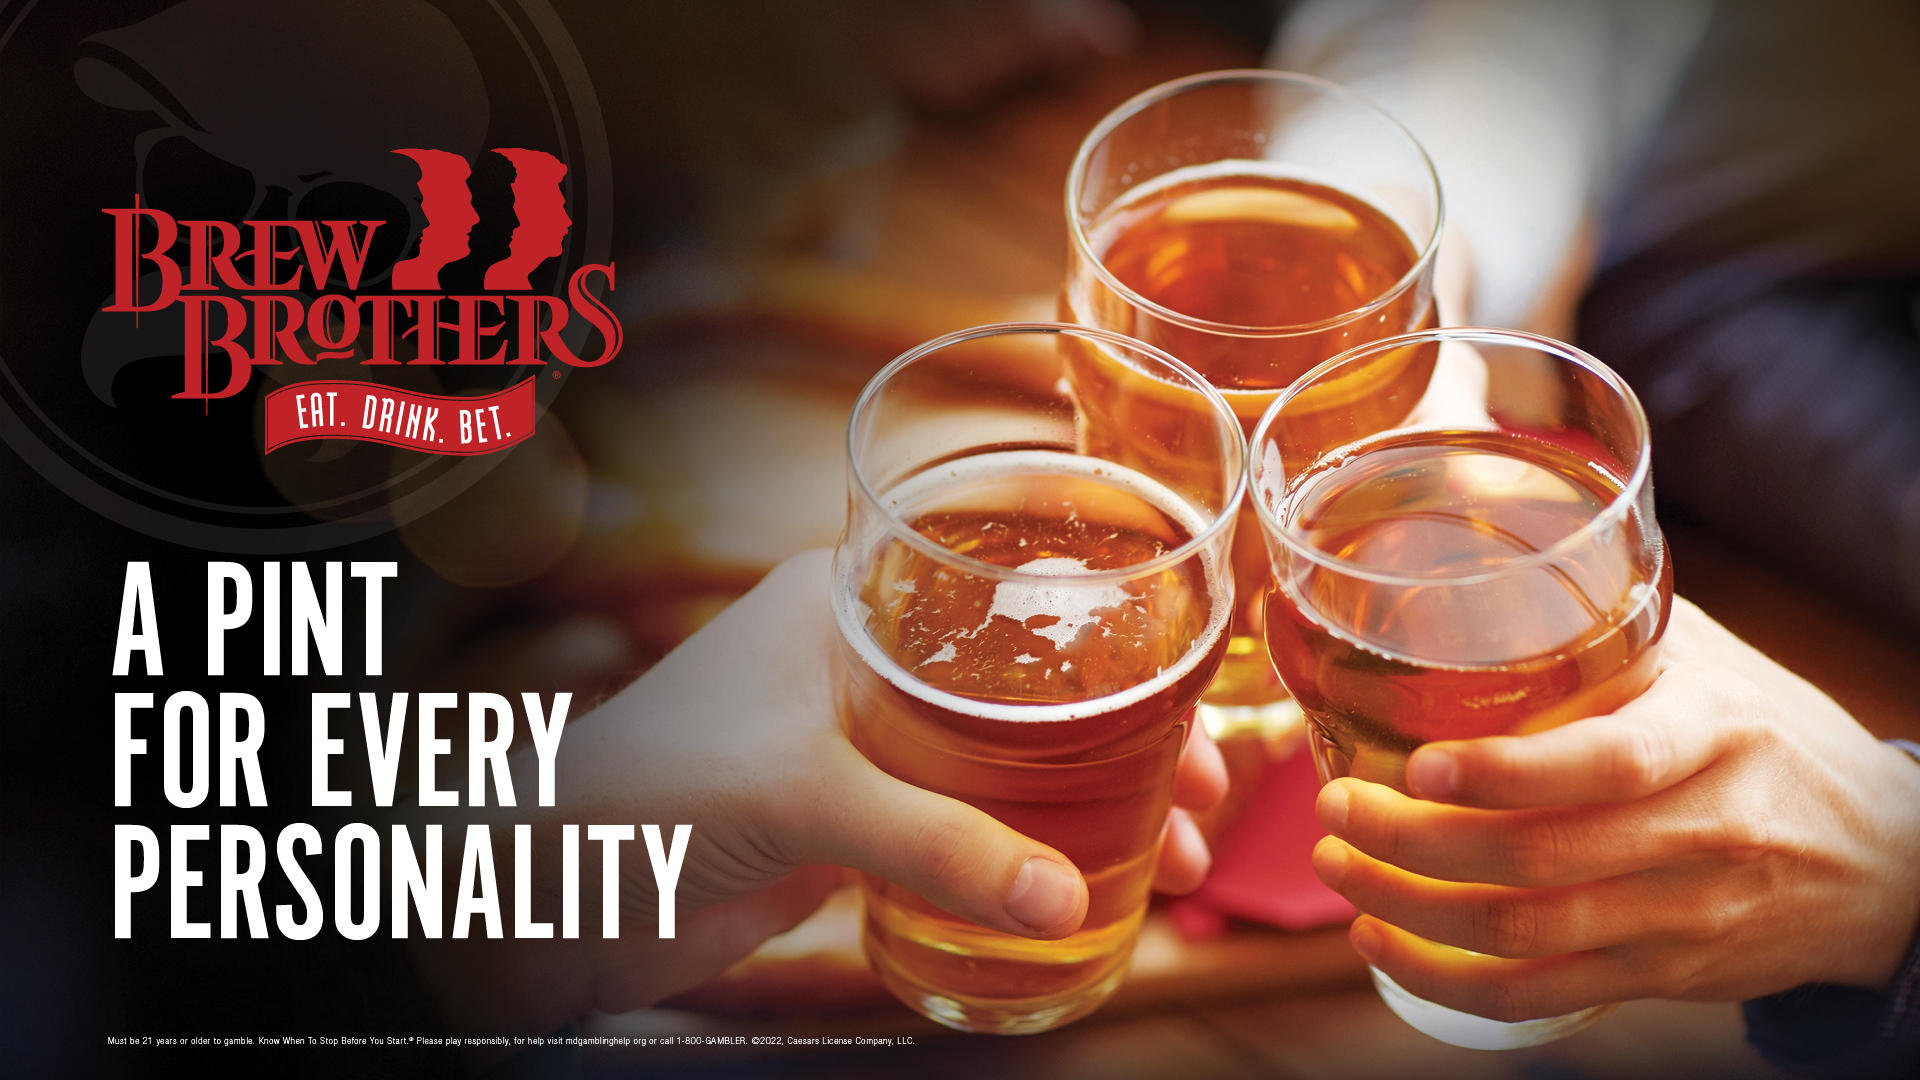 There's a pint for every personality at Brew Brothers in Horseshoe Black Hawk